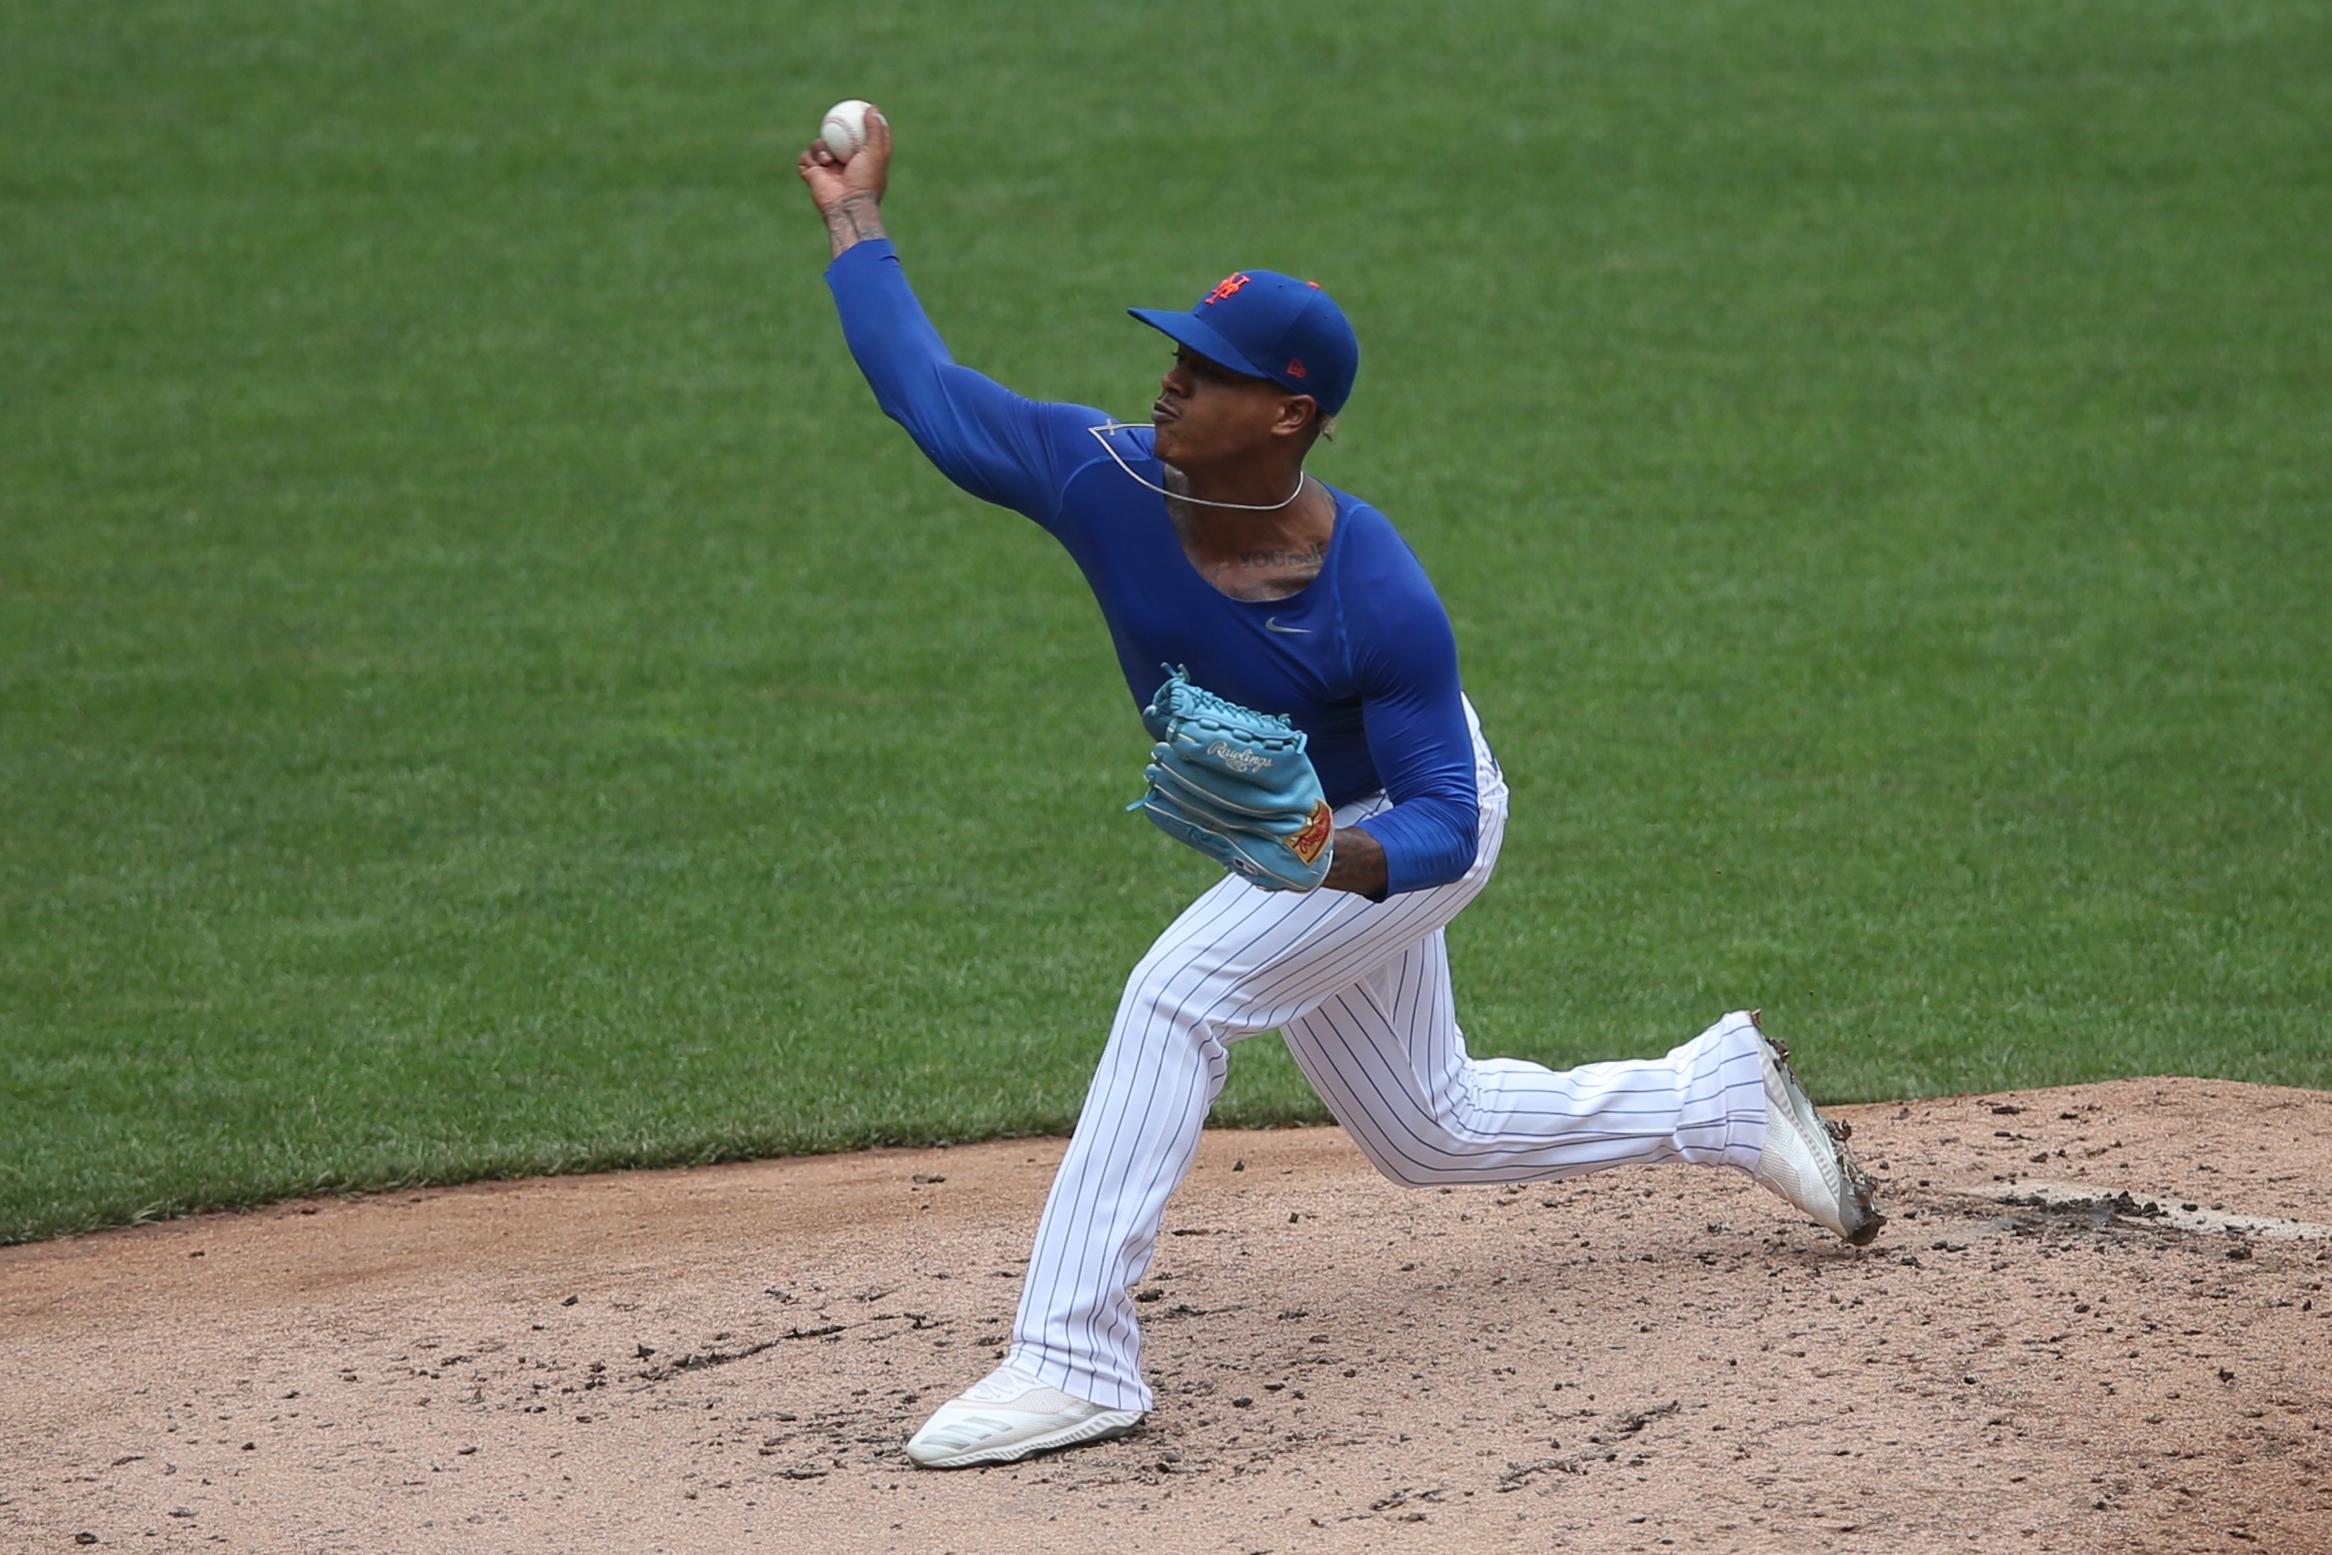 Marcus Stroman tosses pitch to home plate at Citi Field / USA TODAY Sports